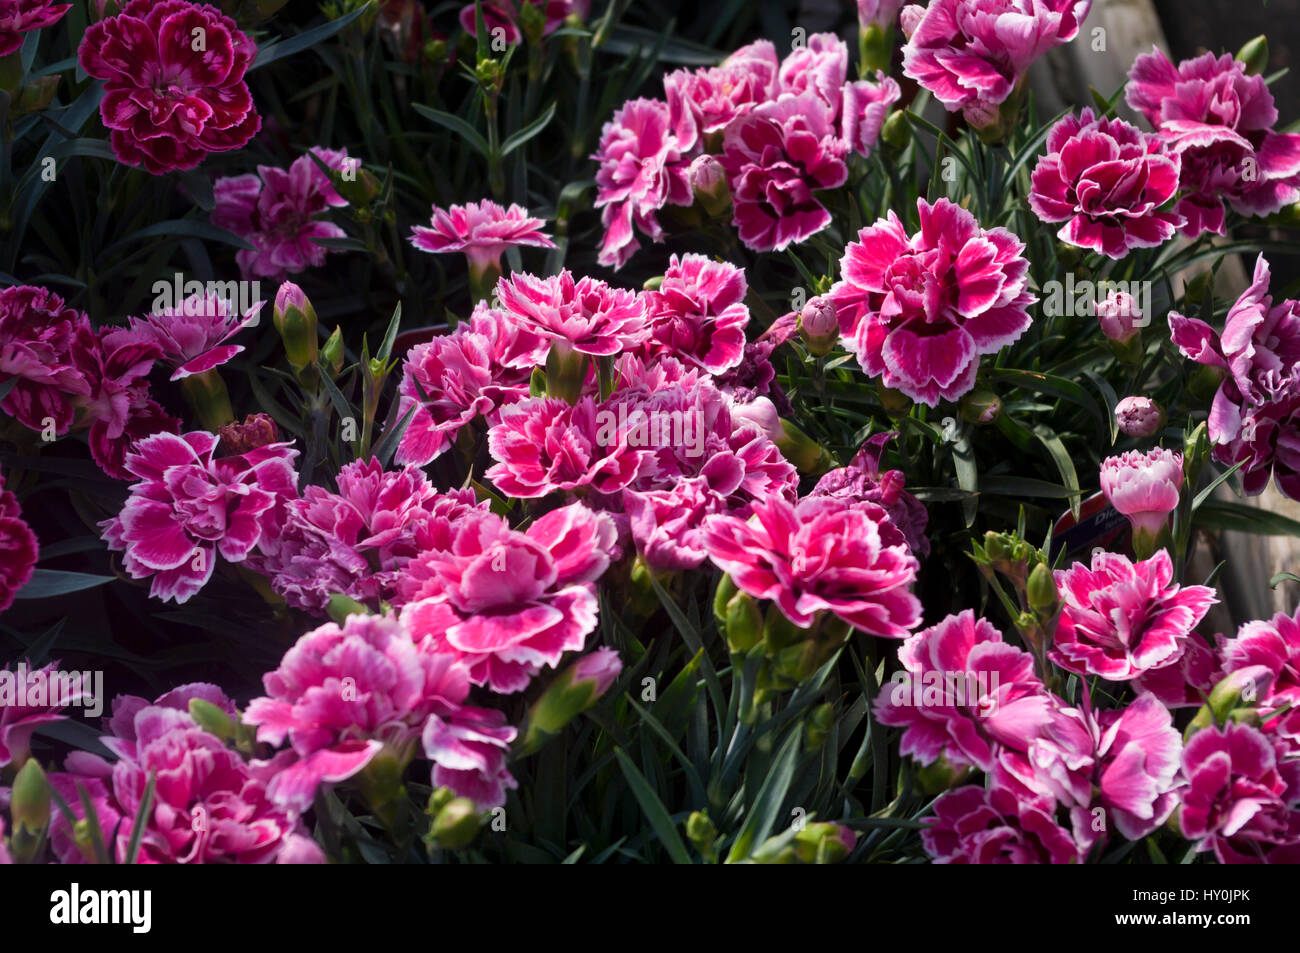 Red and White Dianthus Tenelke Flowers Otherwise known as Pinks Stock Photo